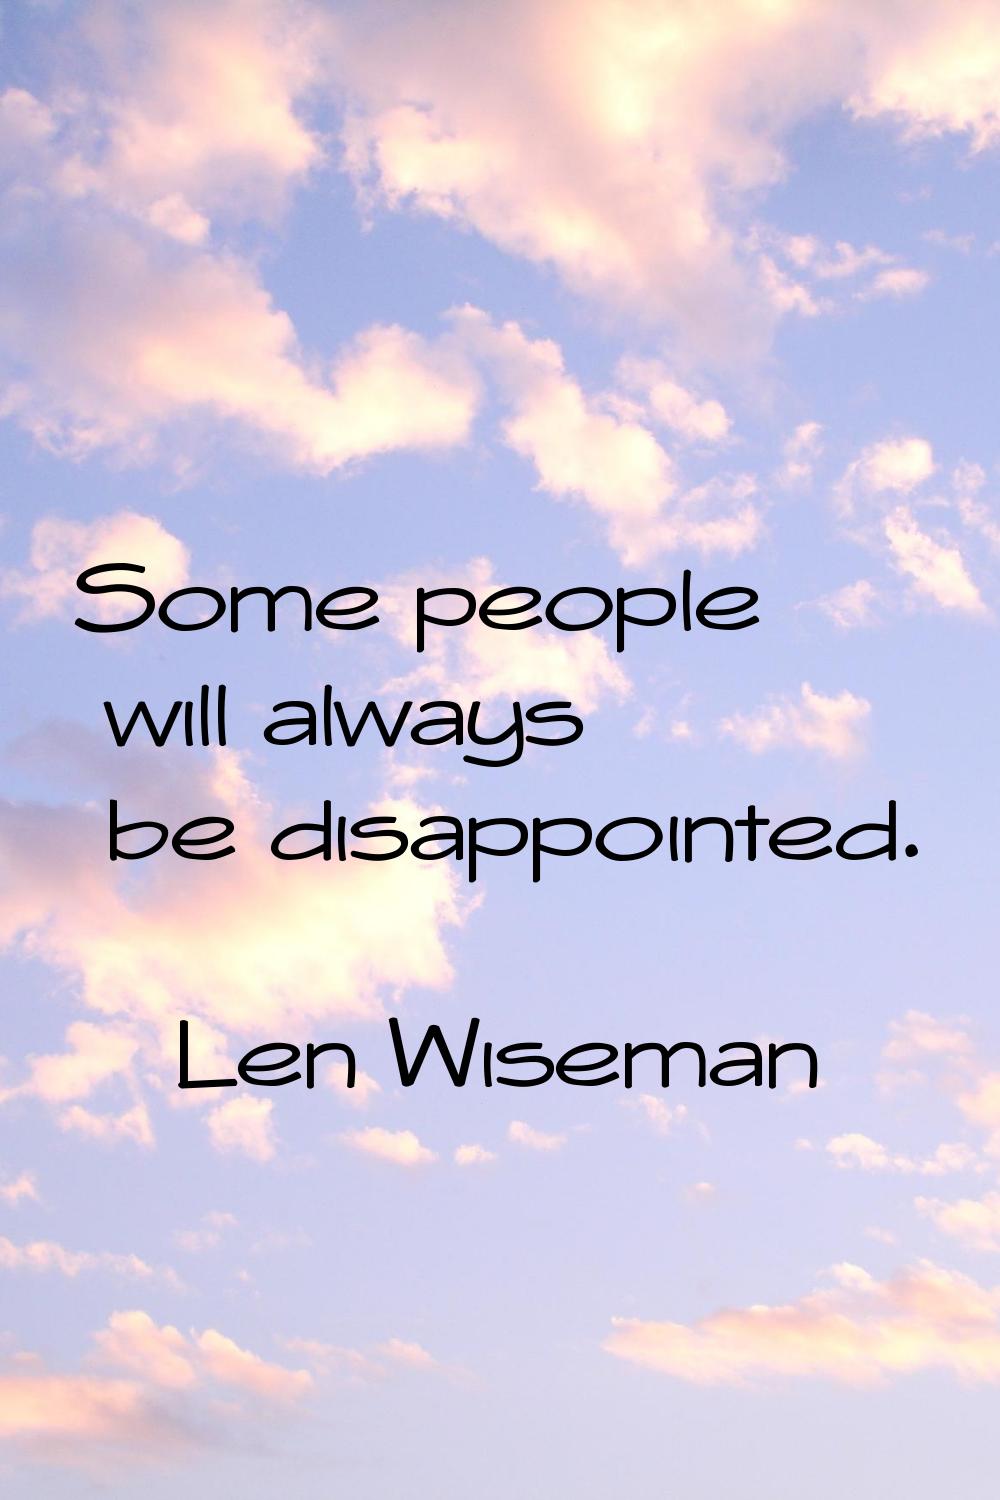 Some people will always be disappointed.